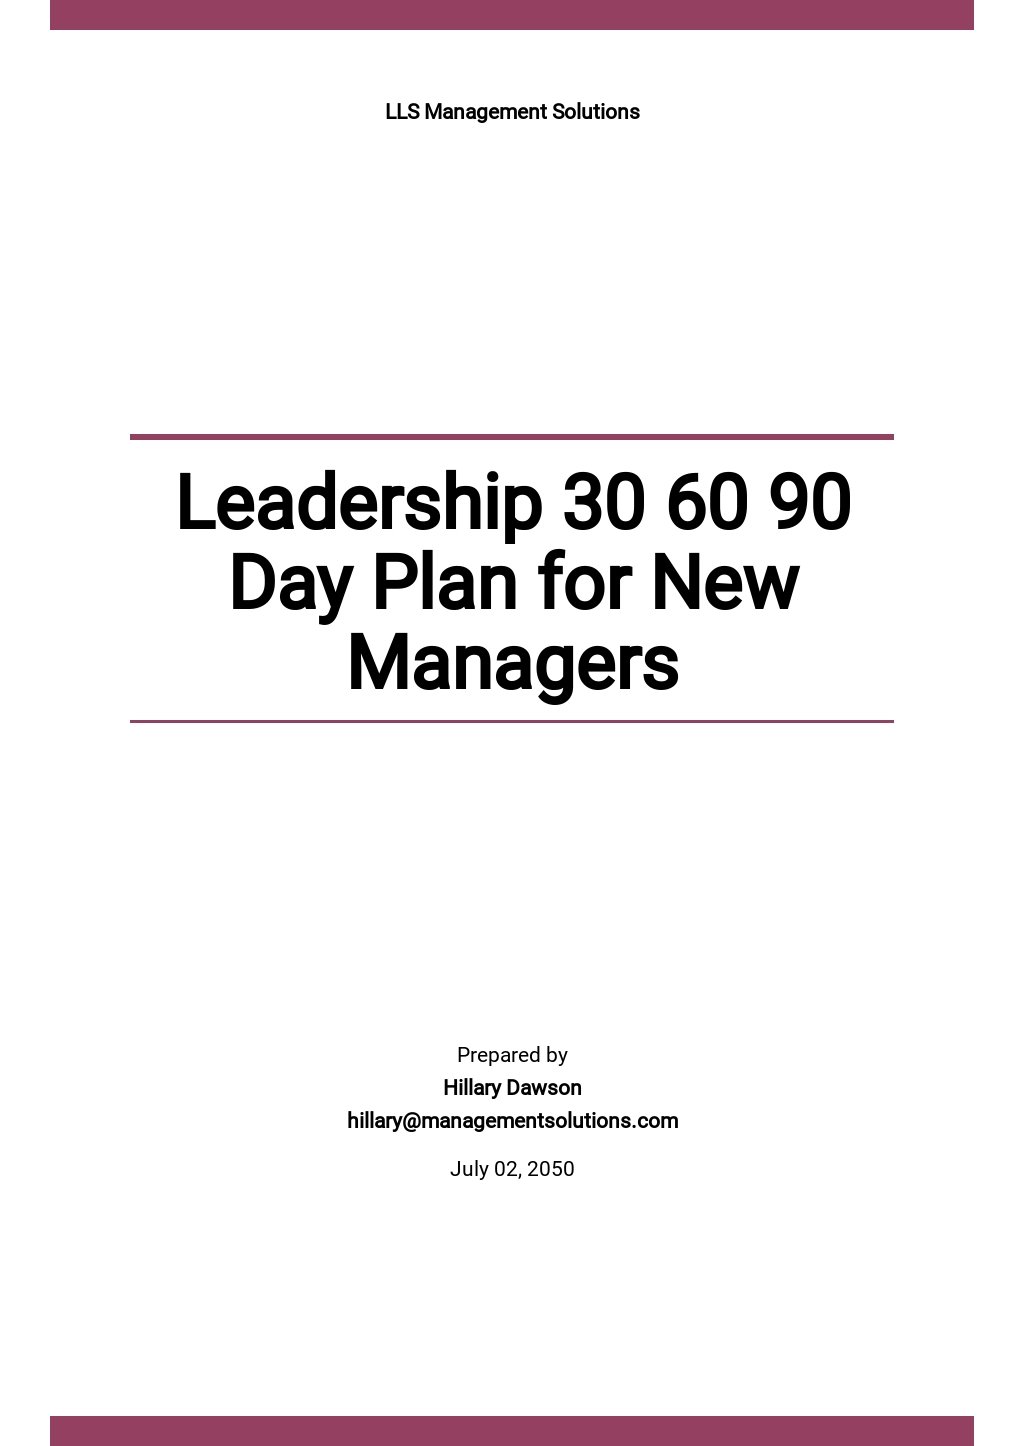 example 30 60 90 plan manager